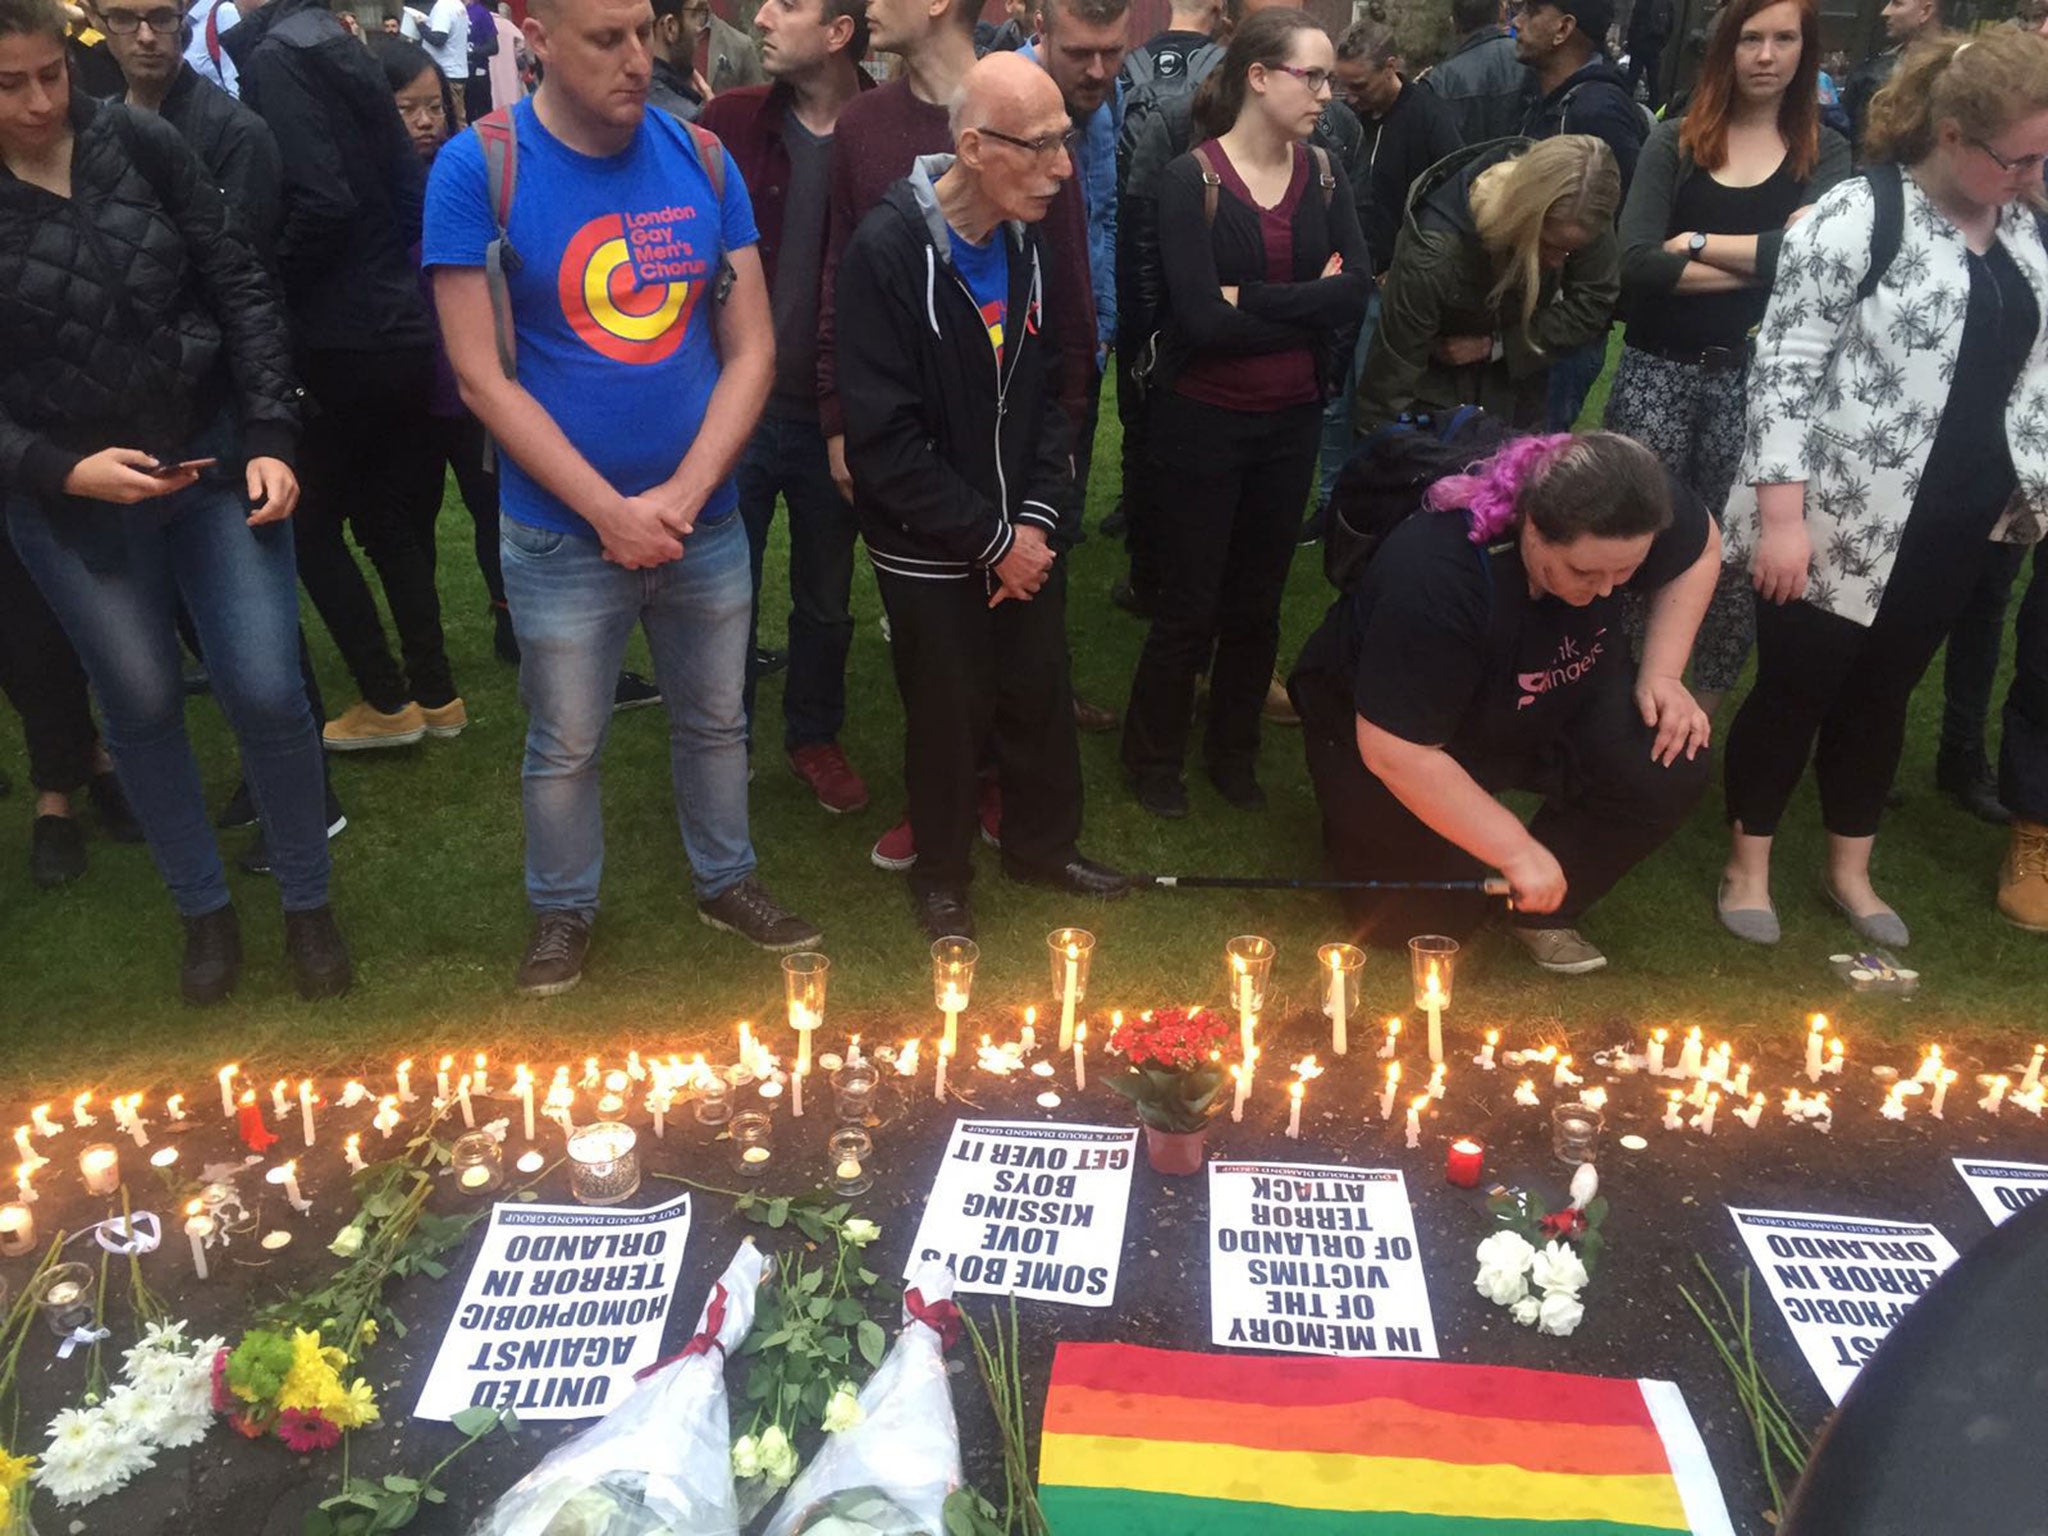 Crowds gathered in Old Compton Street in Soho as a sign of respect for the victims of the Orlando shooting